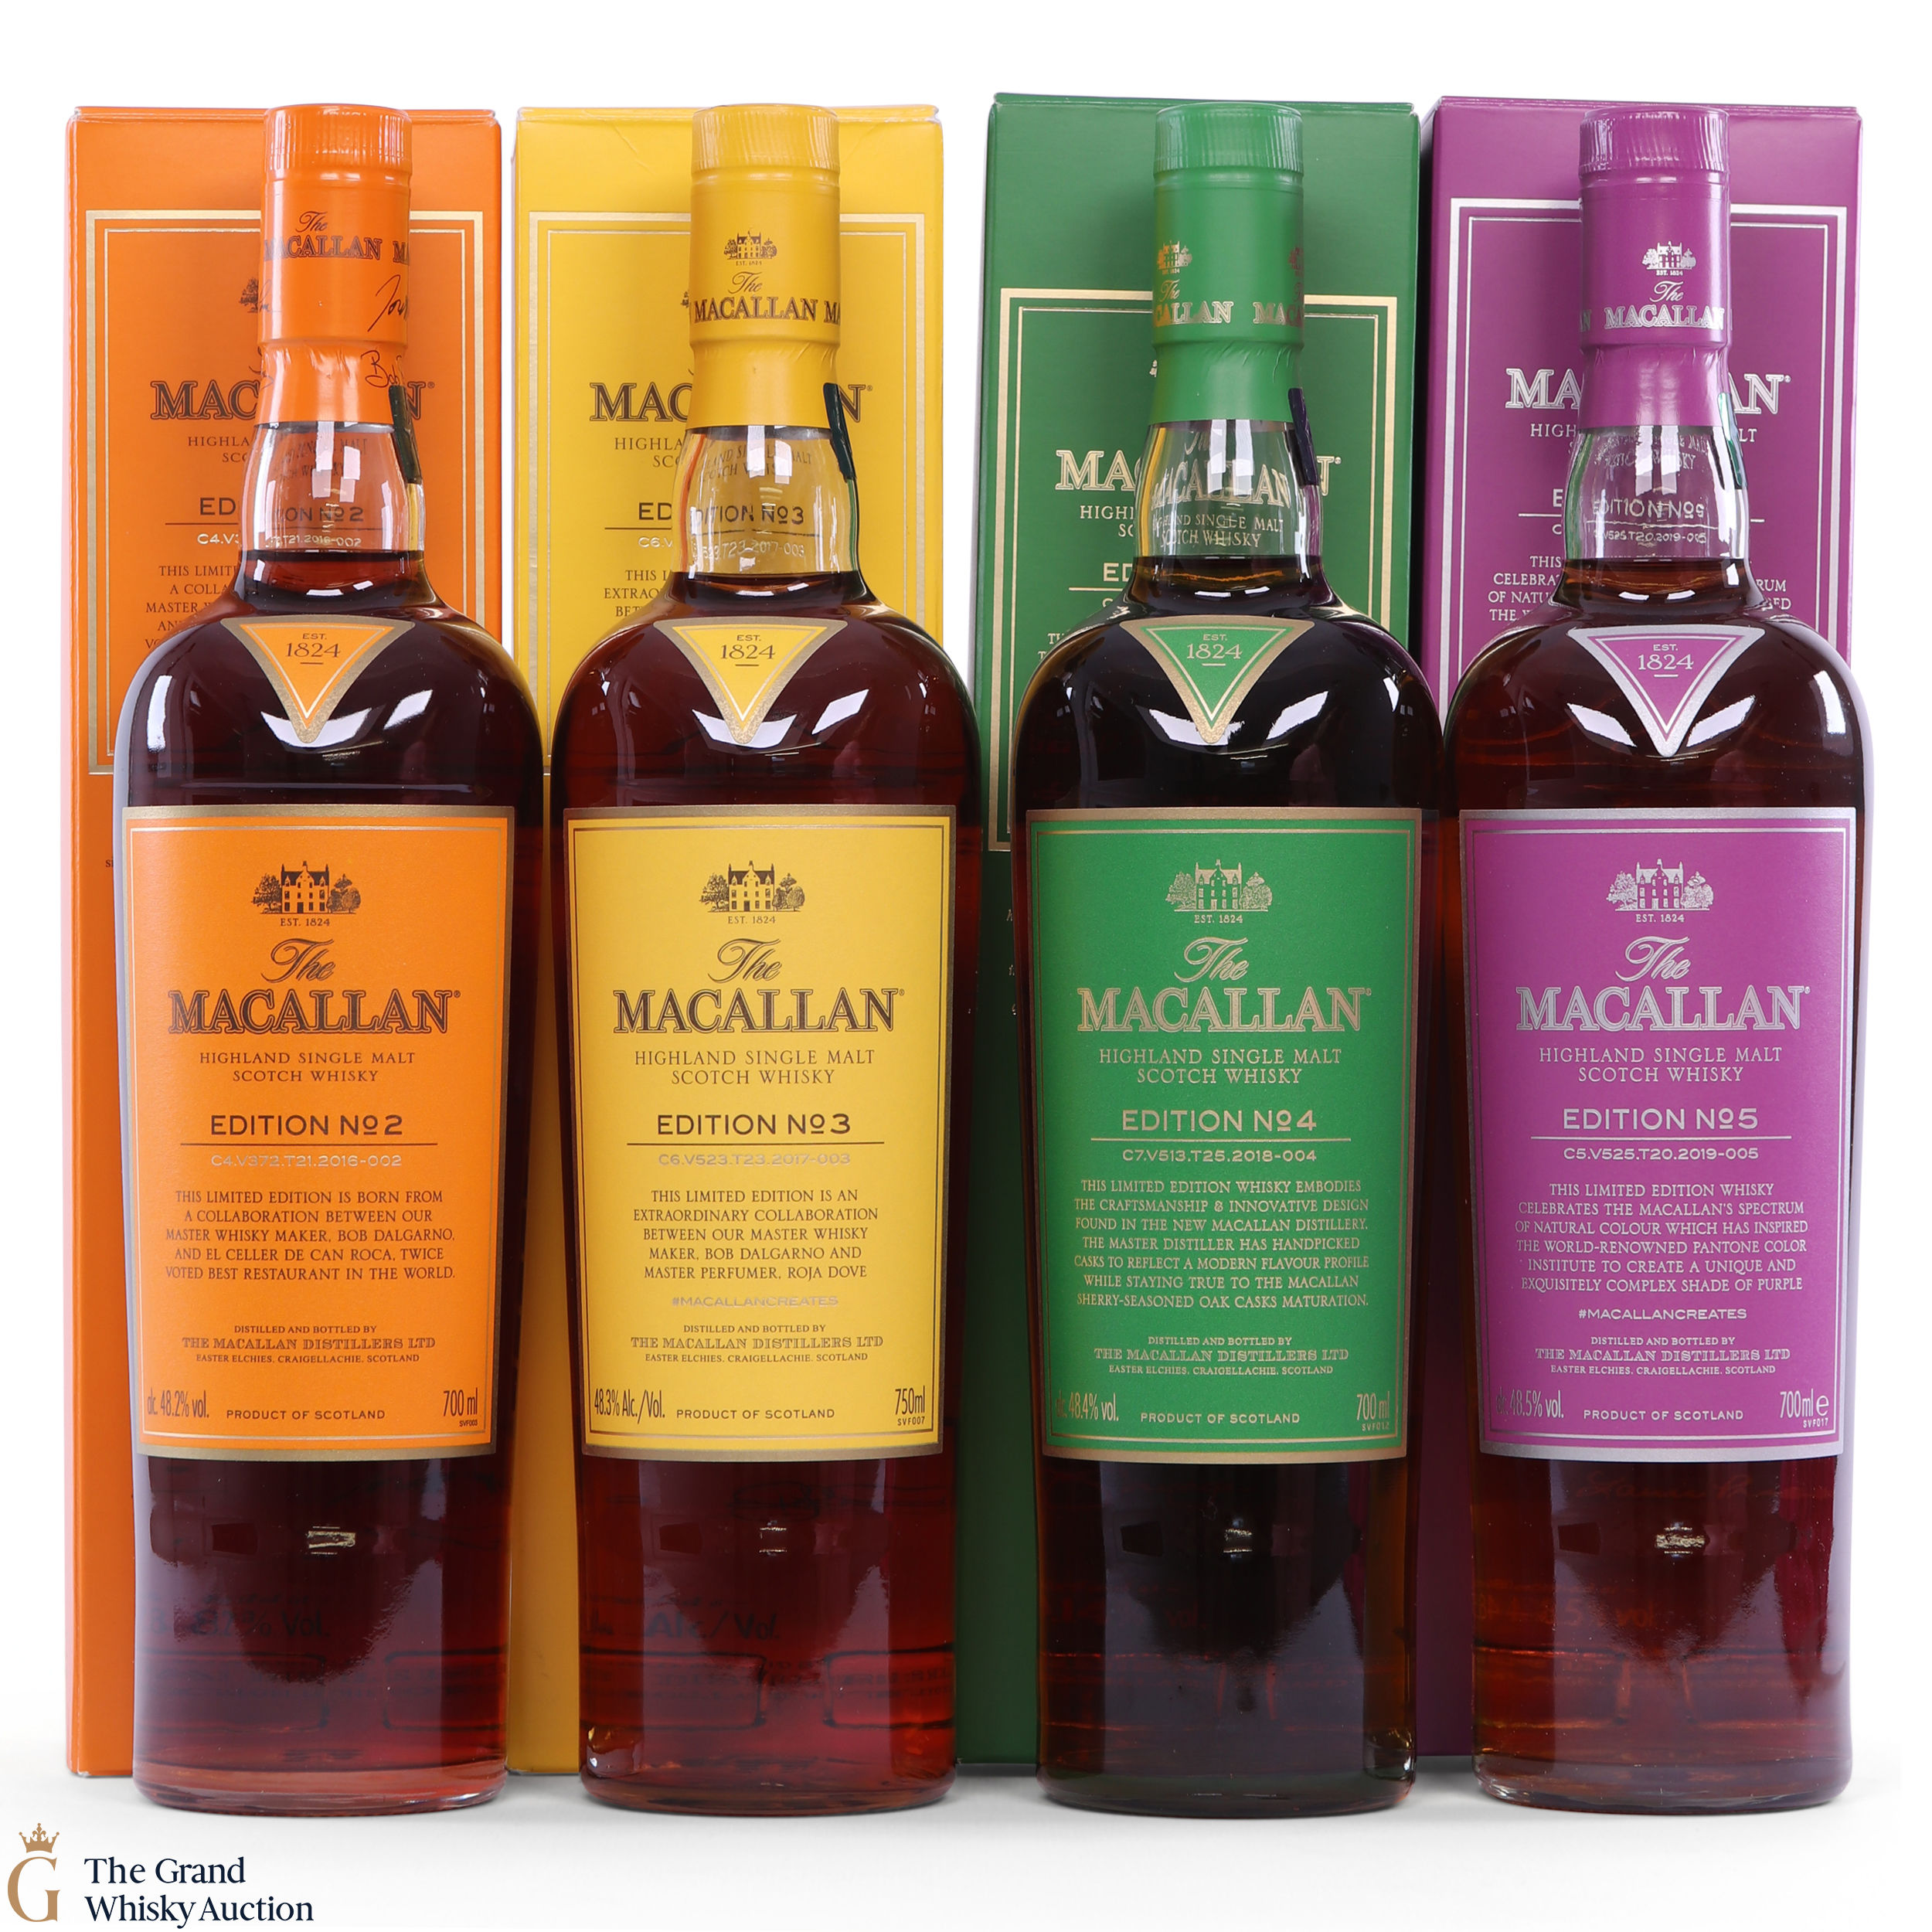 Macallan Edition 2 3 4 5 Auction The Grand Whisky Auction